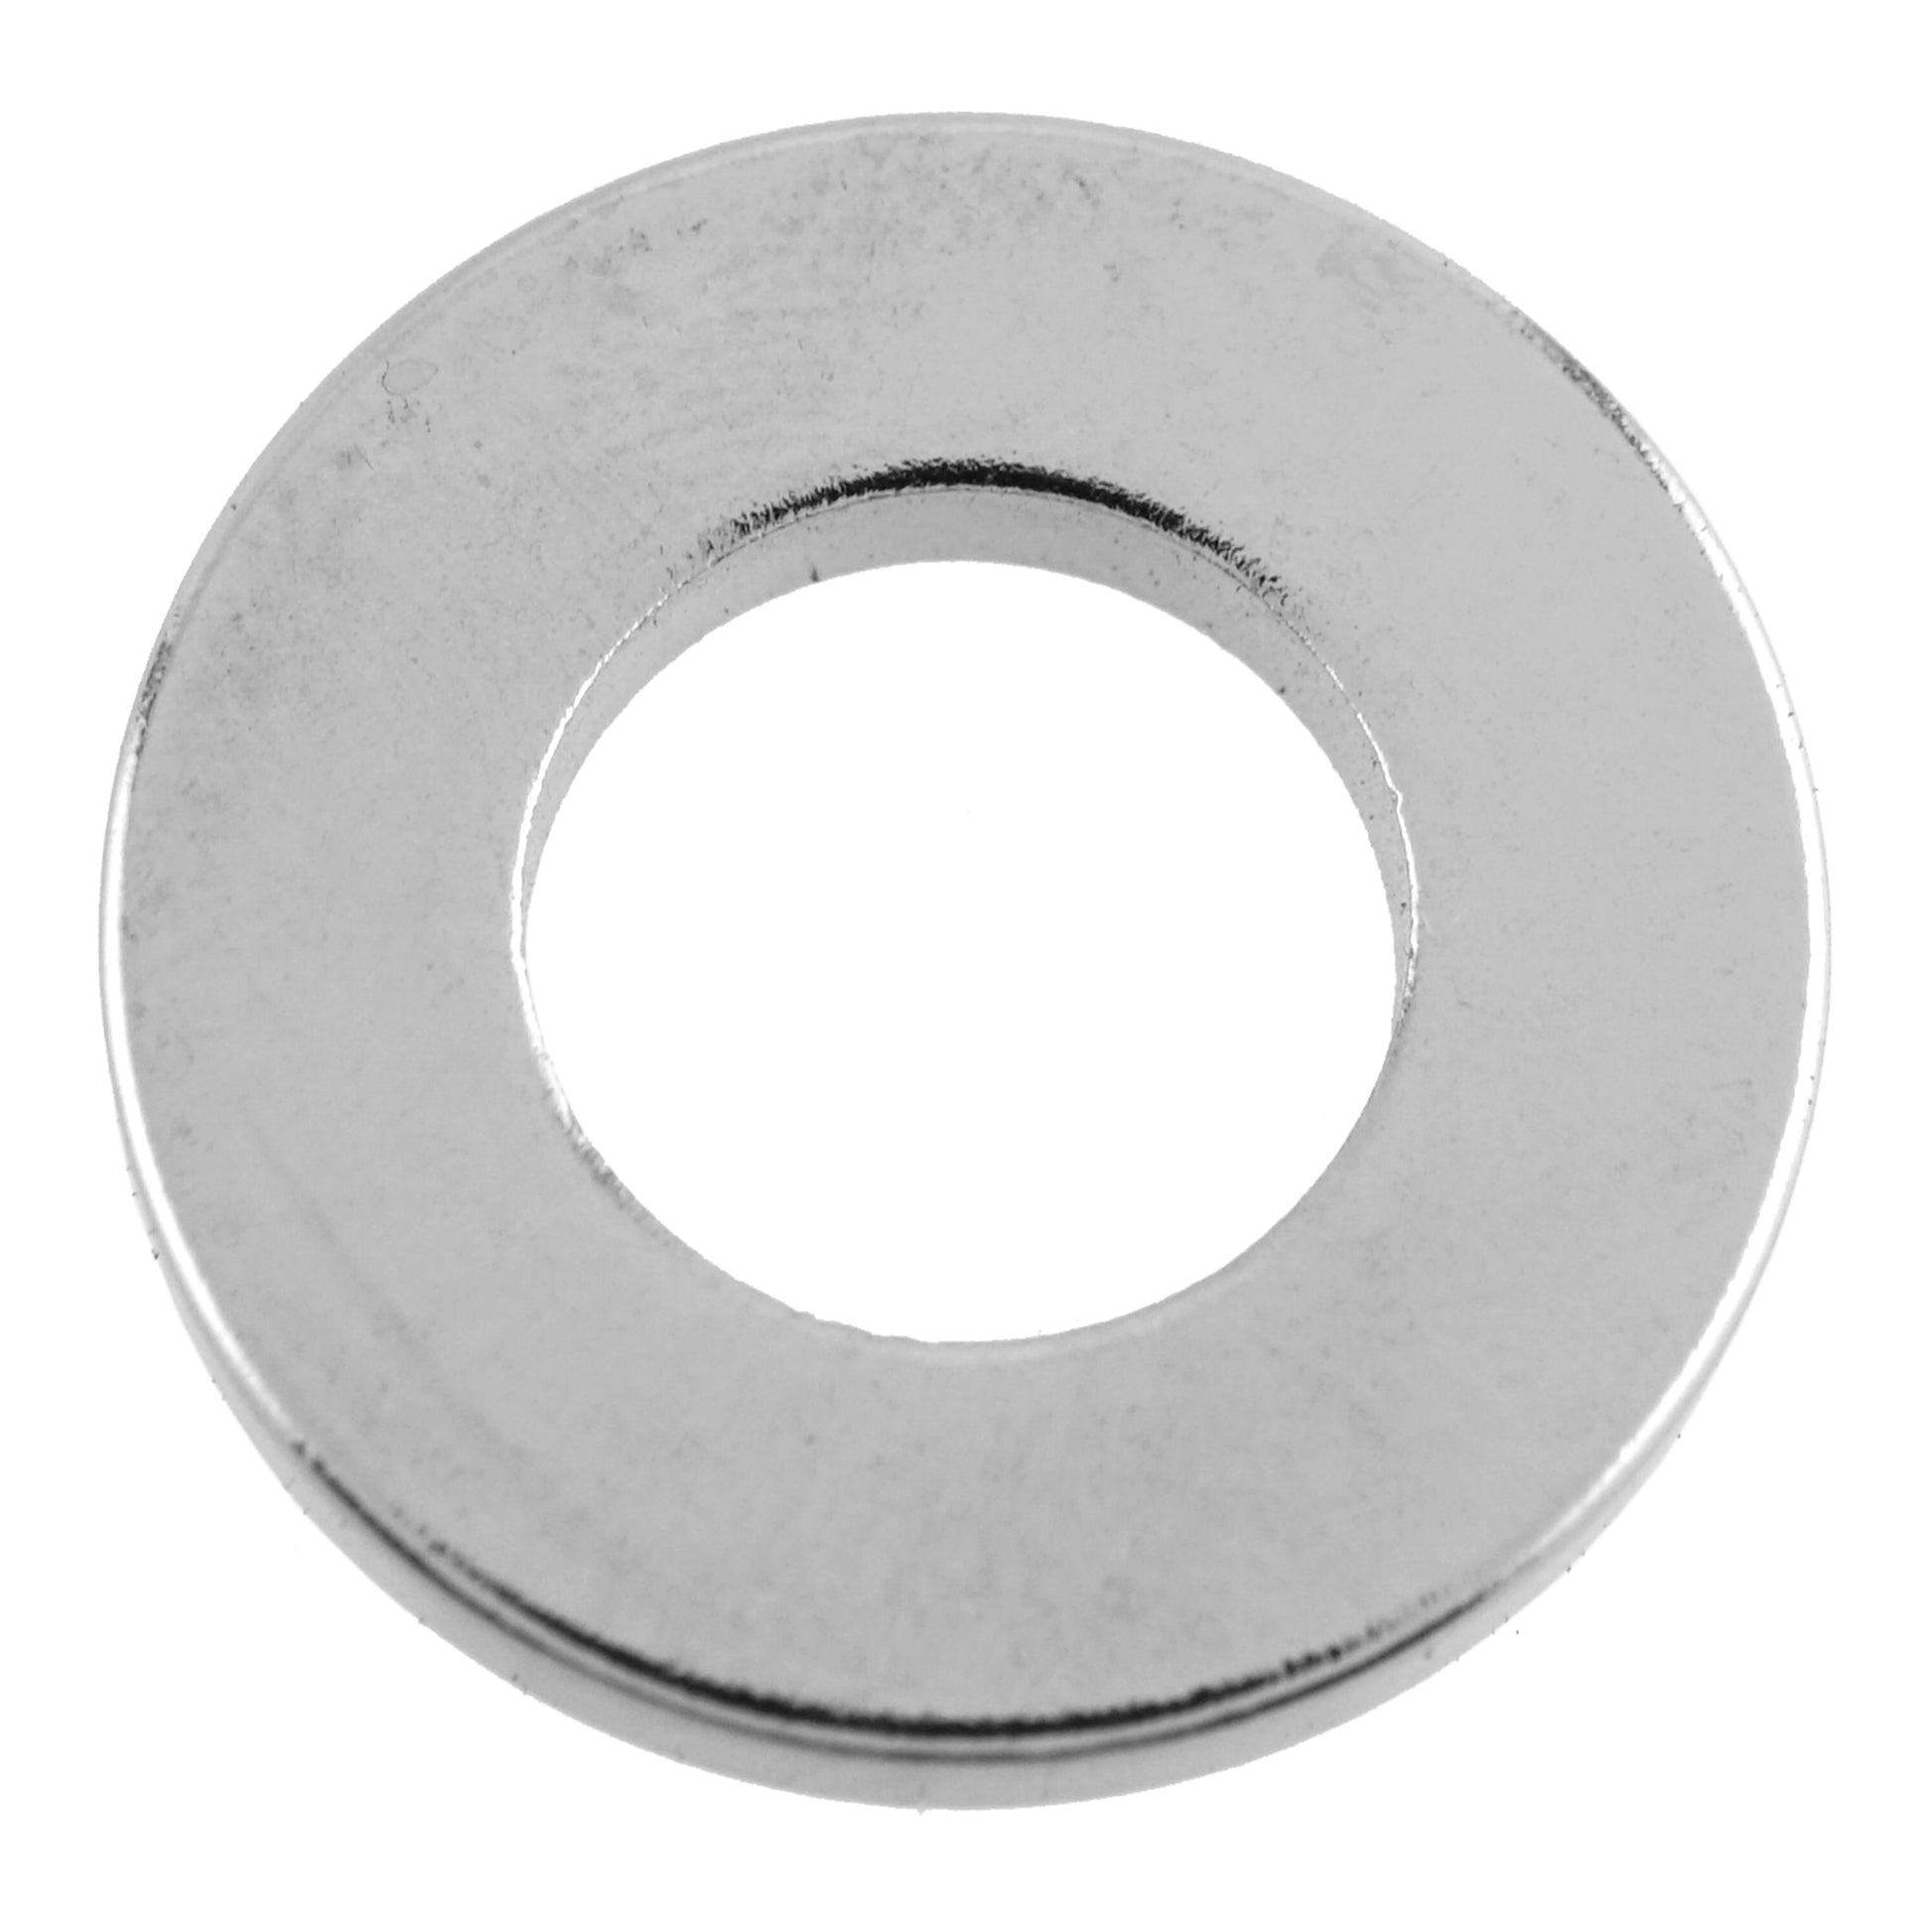 Load image into Gallery viewer, 07091 Neodymium Ring Magnets (3pk) - Back of Packaging